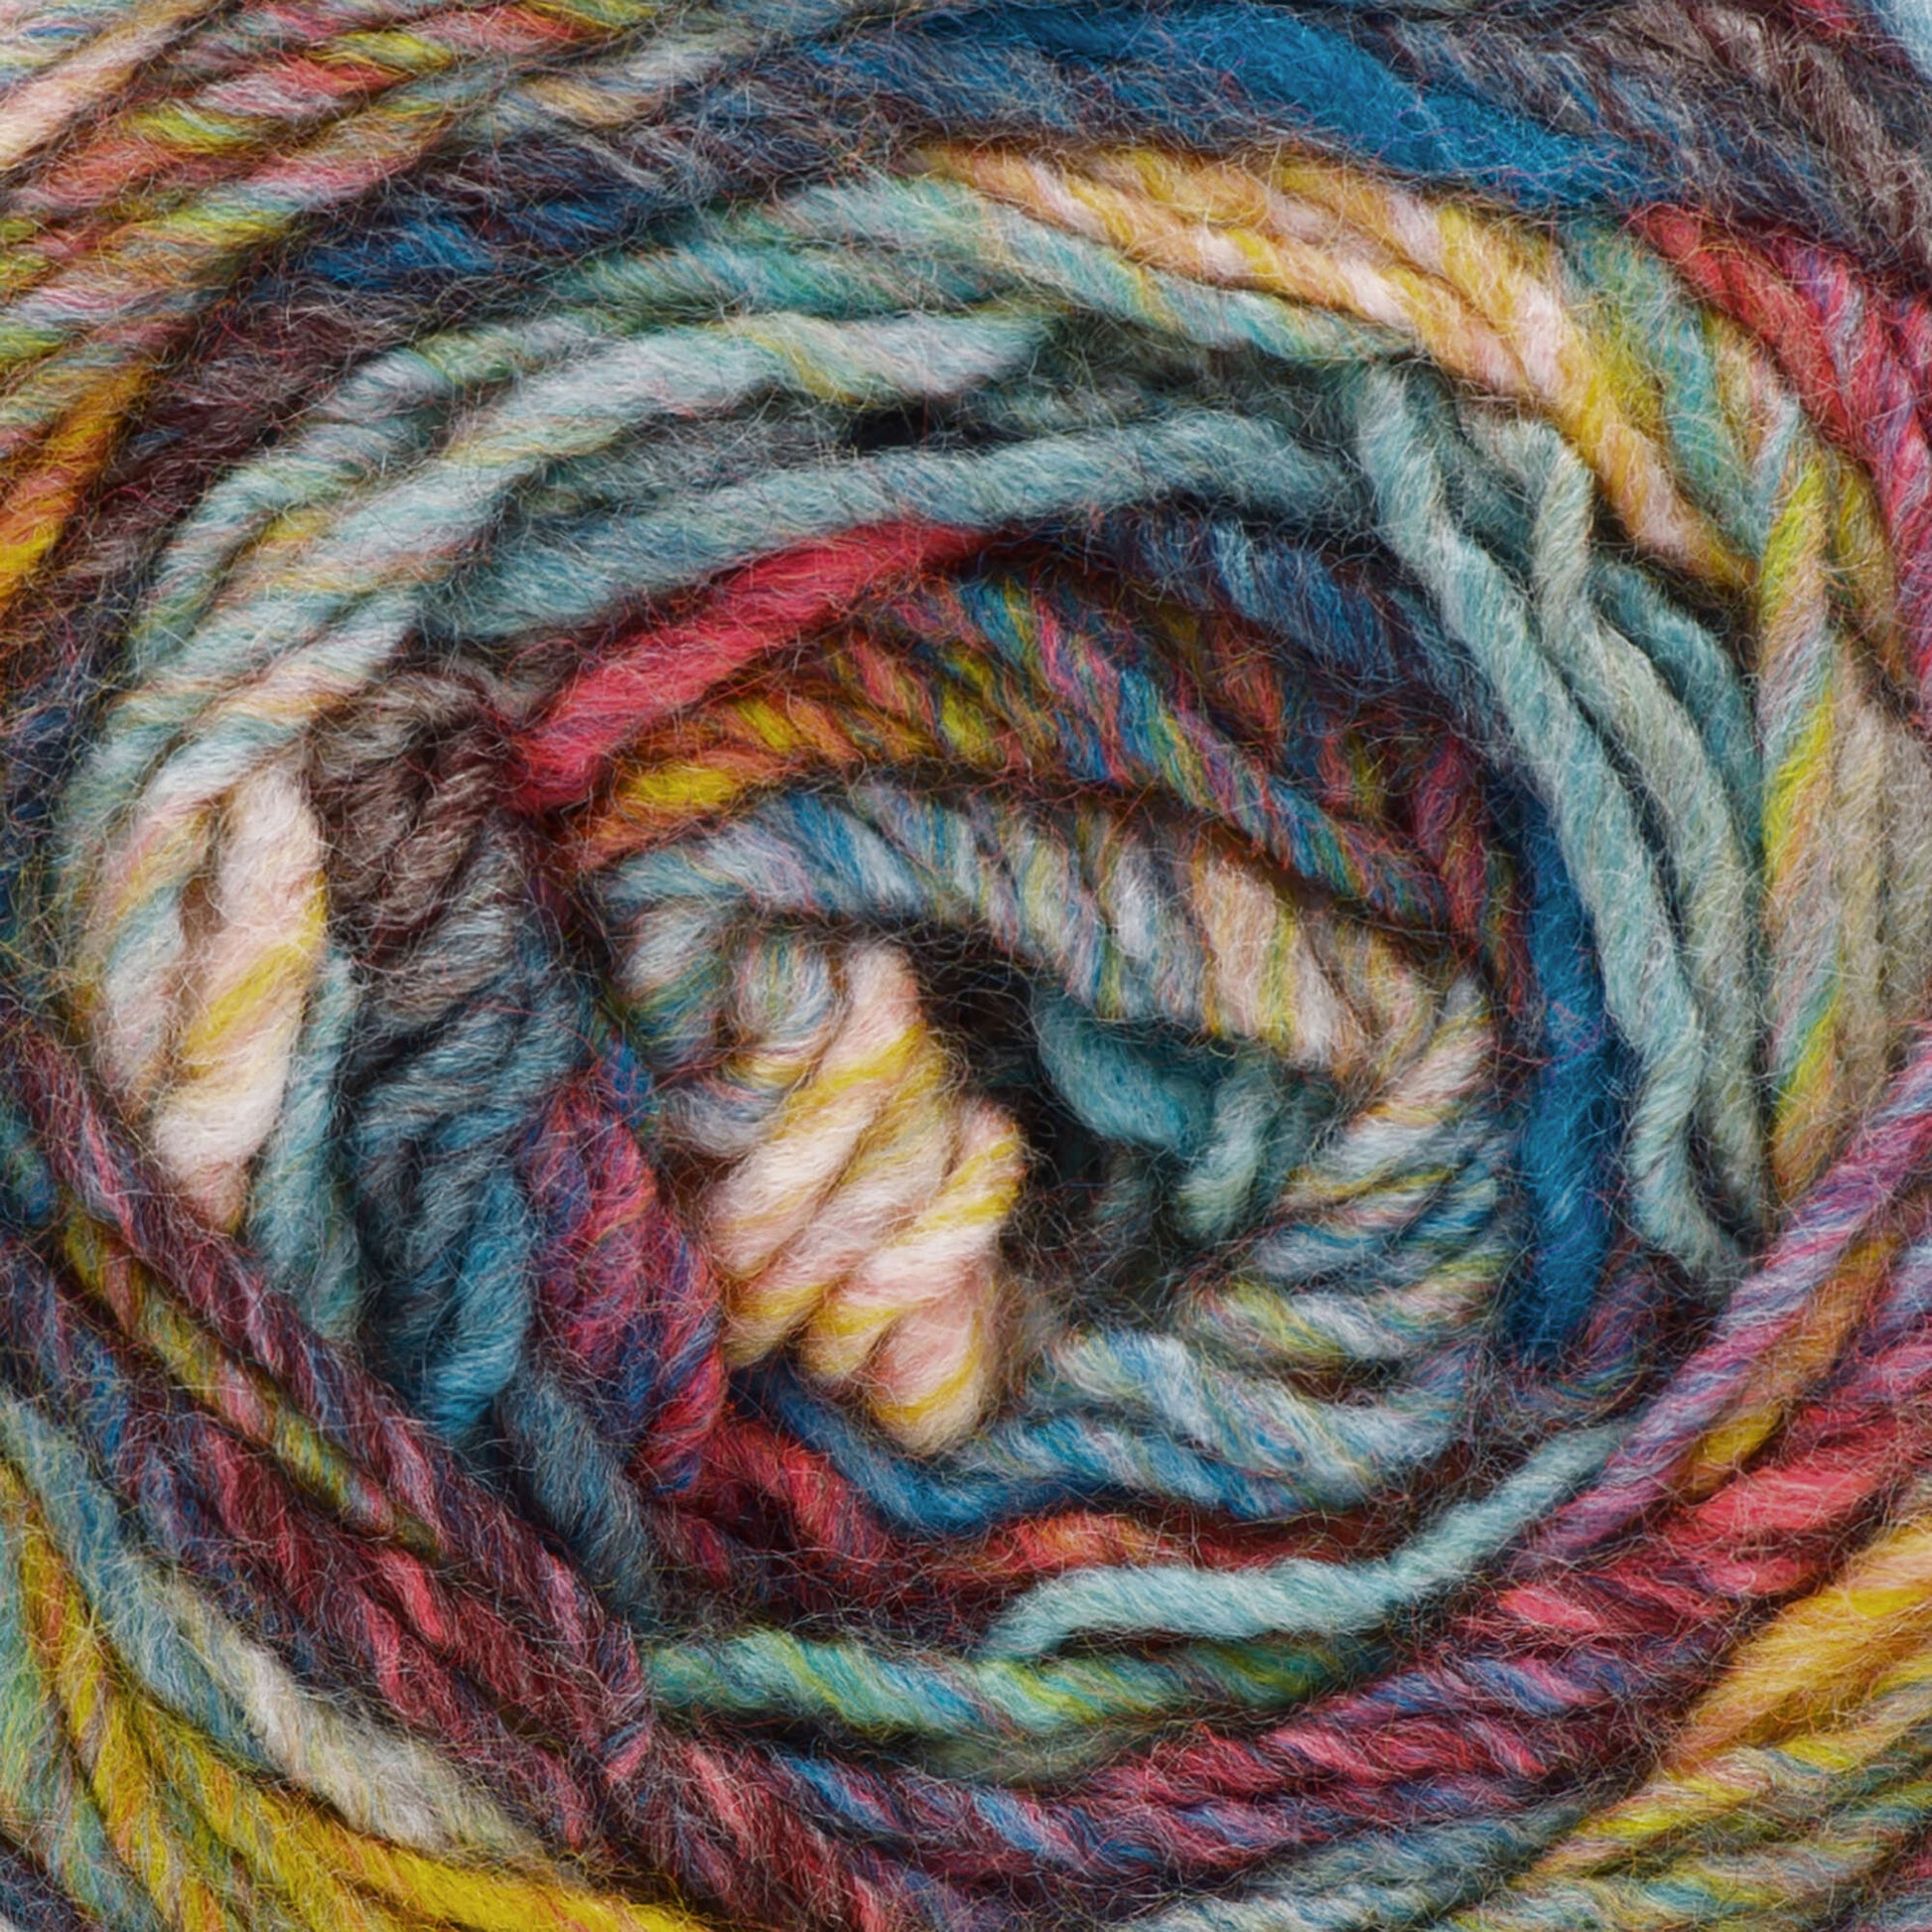 Red Heart Roll With It Melange Yarn - Discontinued shades